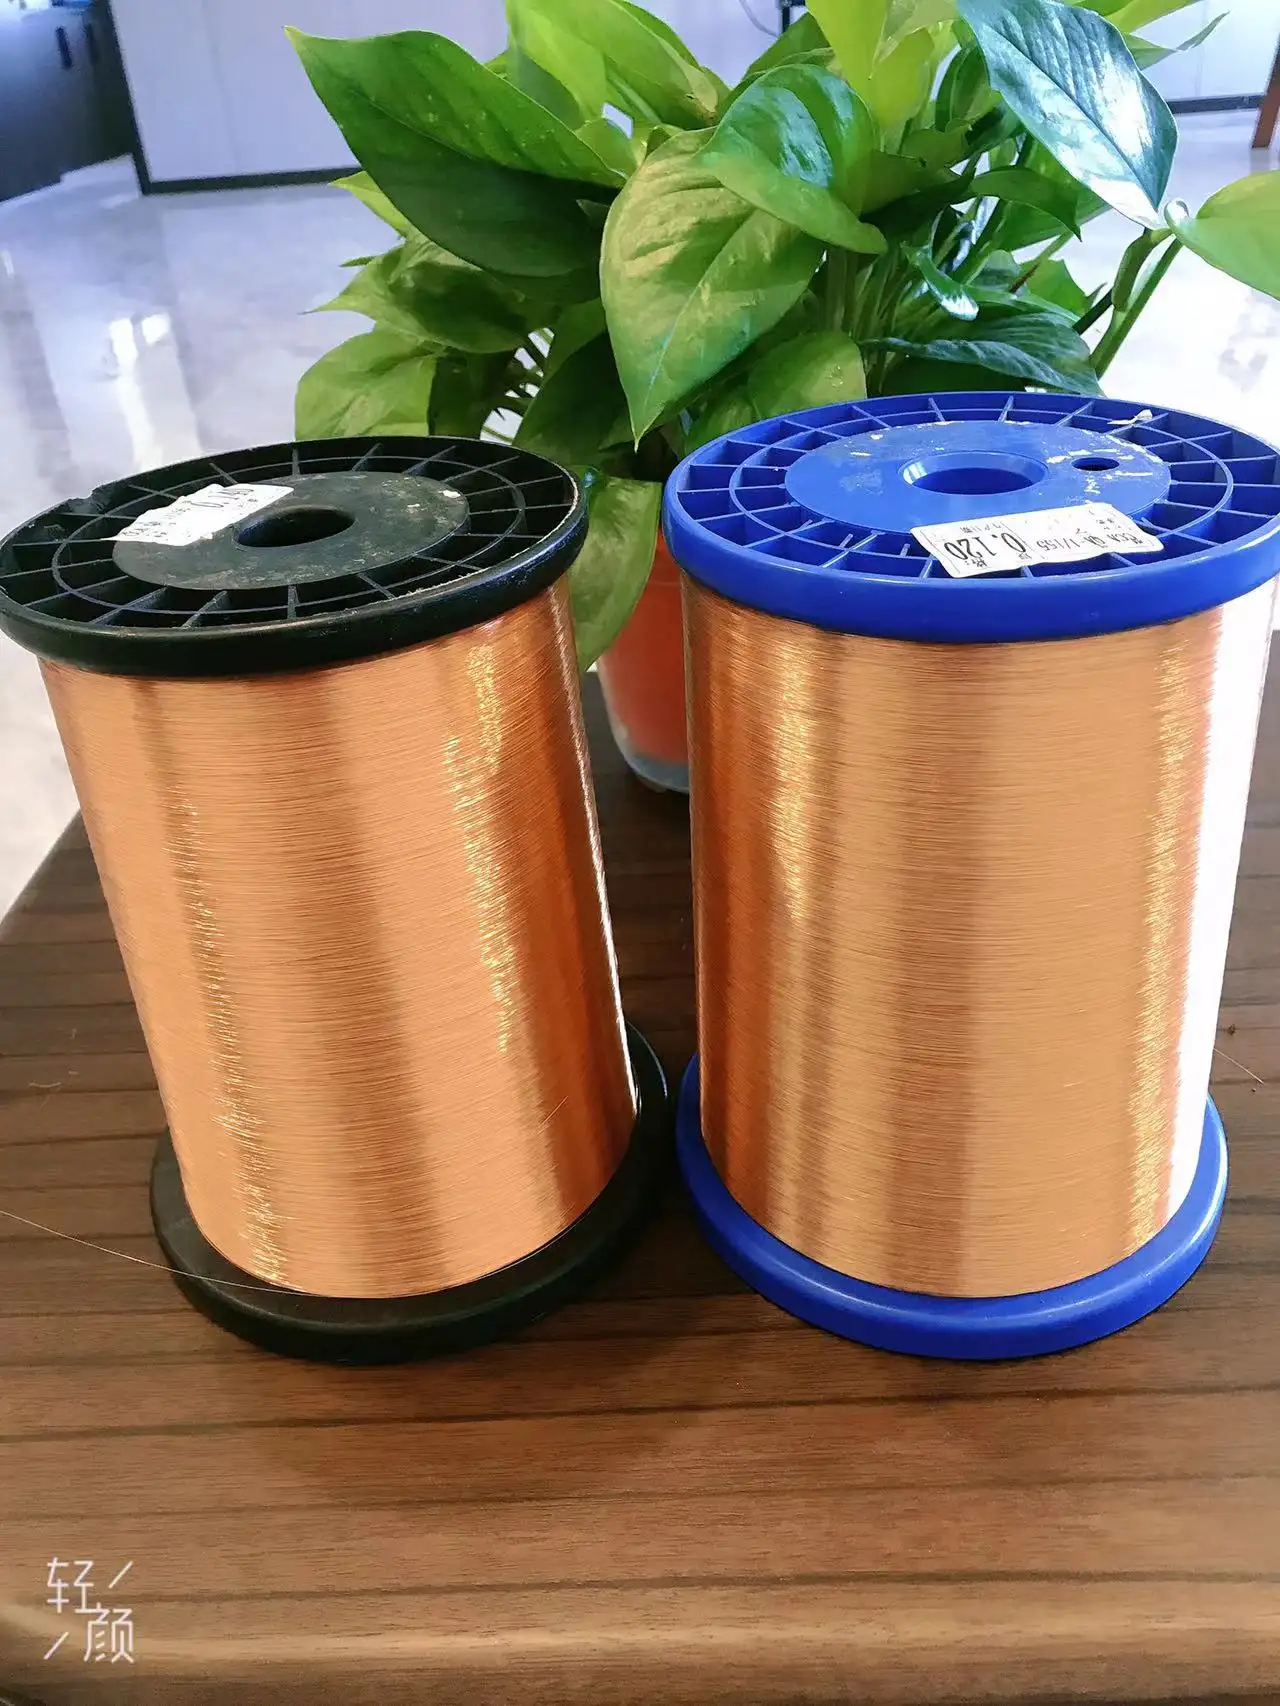 Copper Clad Aluminum Wire electrical wire cable 37 SWG 0.17mm 180 solderable polyurethane enameled CCA wire/heavy film